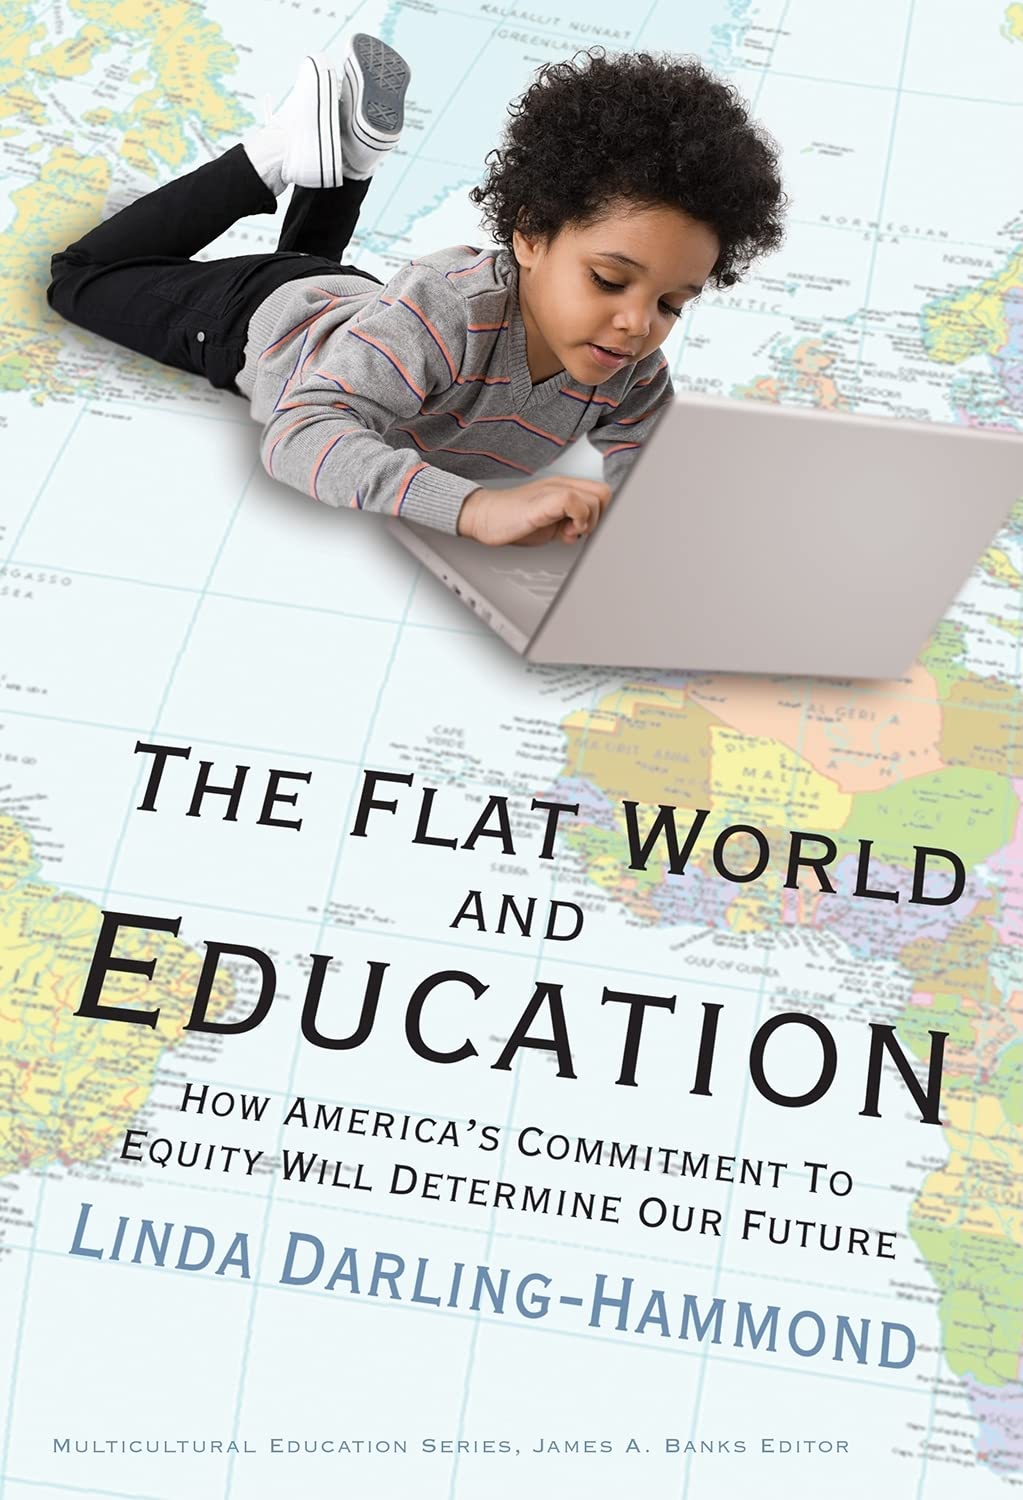 Book cover of this Linda Darling-Hammond 2010 publication: The Flat World and Education: How America's Commitment to Equity Will Determine Our Future (Multicultural Education Series)